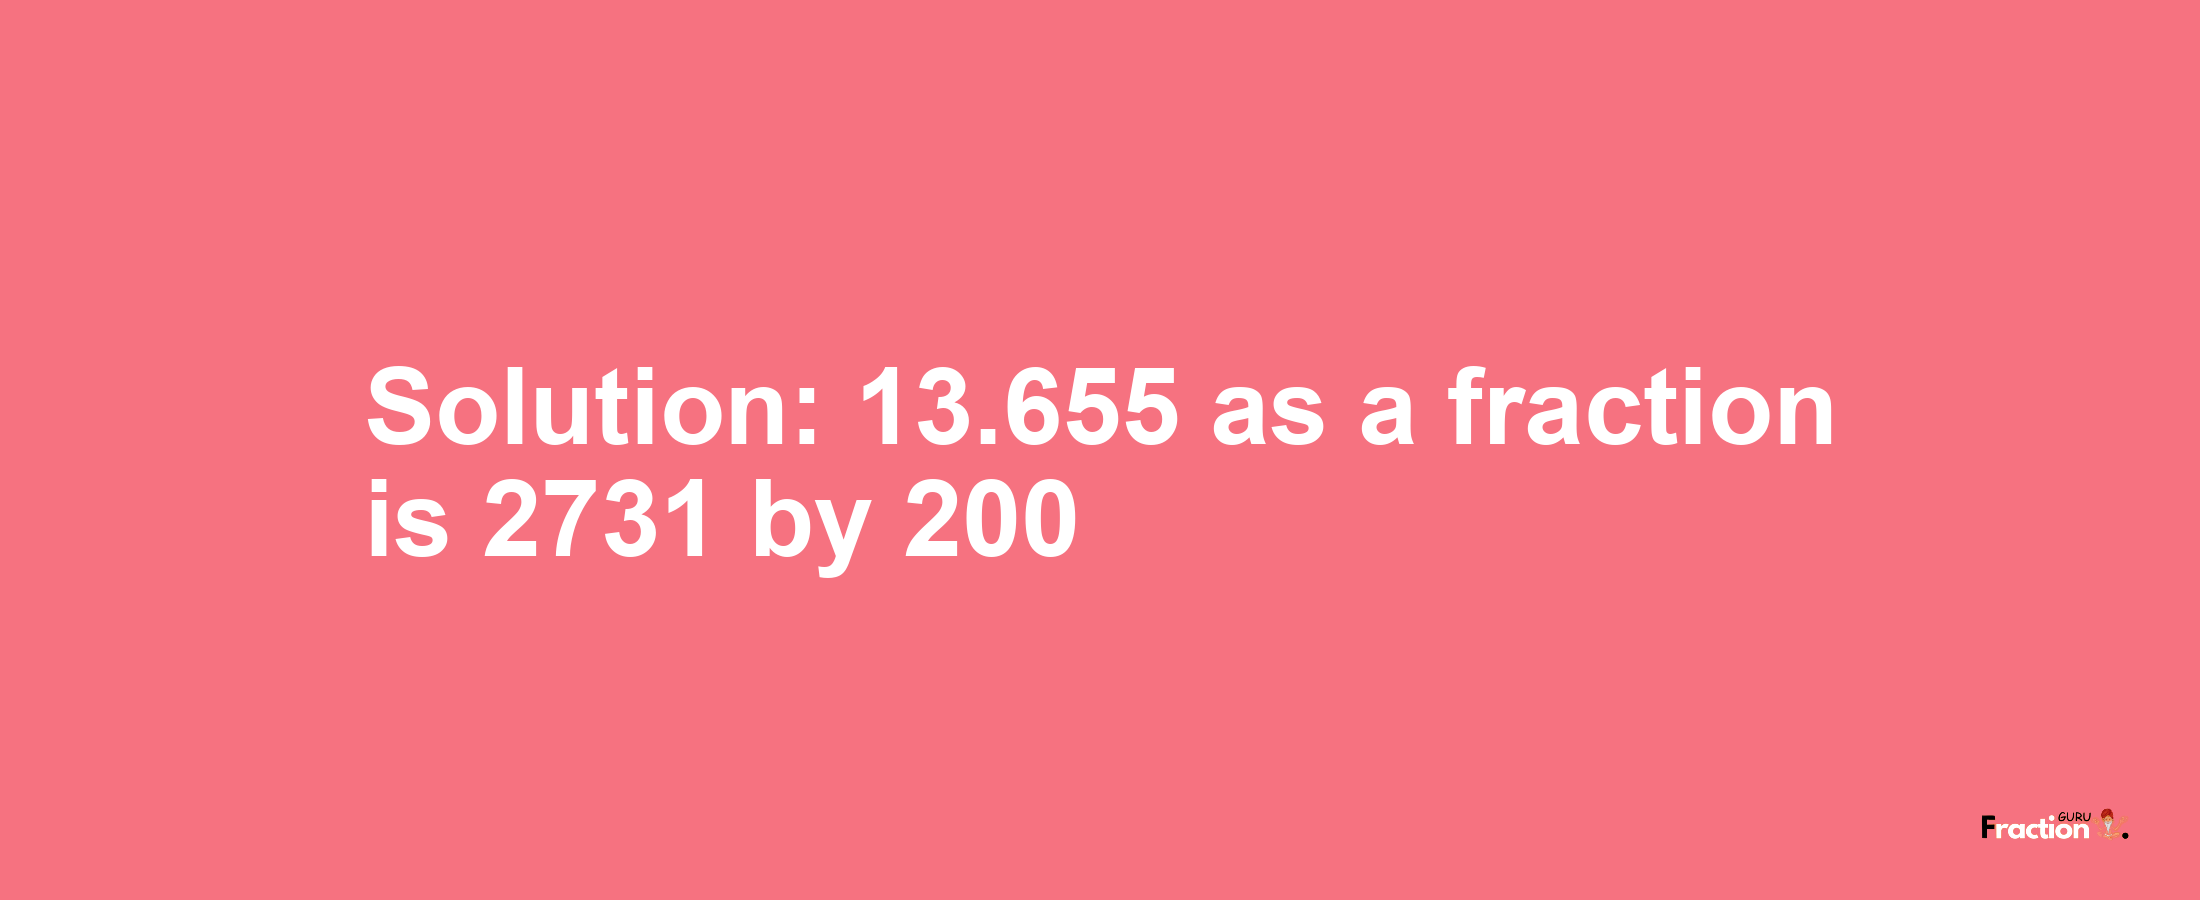 Solution:13.655 as a fraction is 2731/200